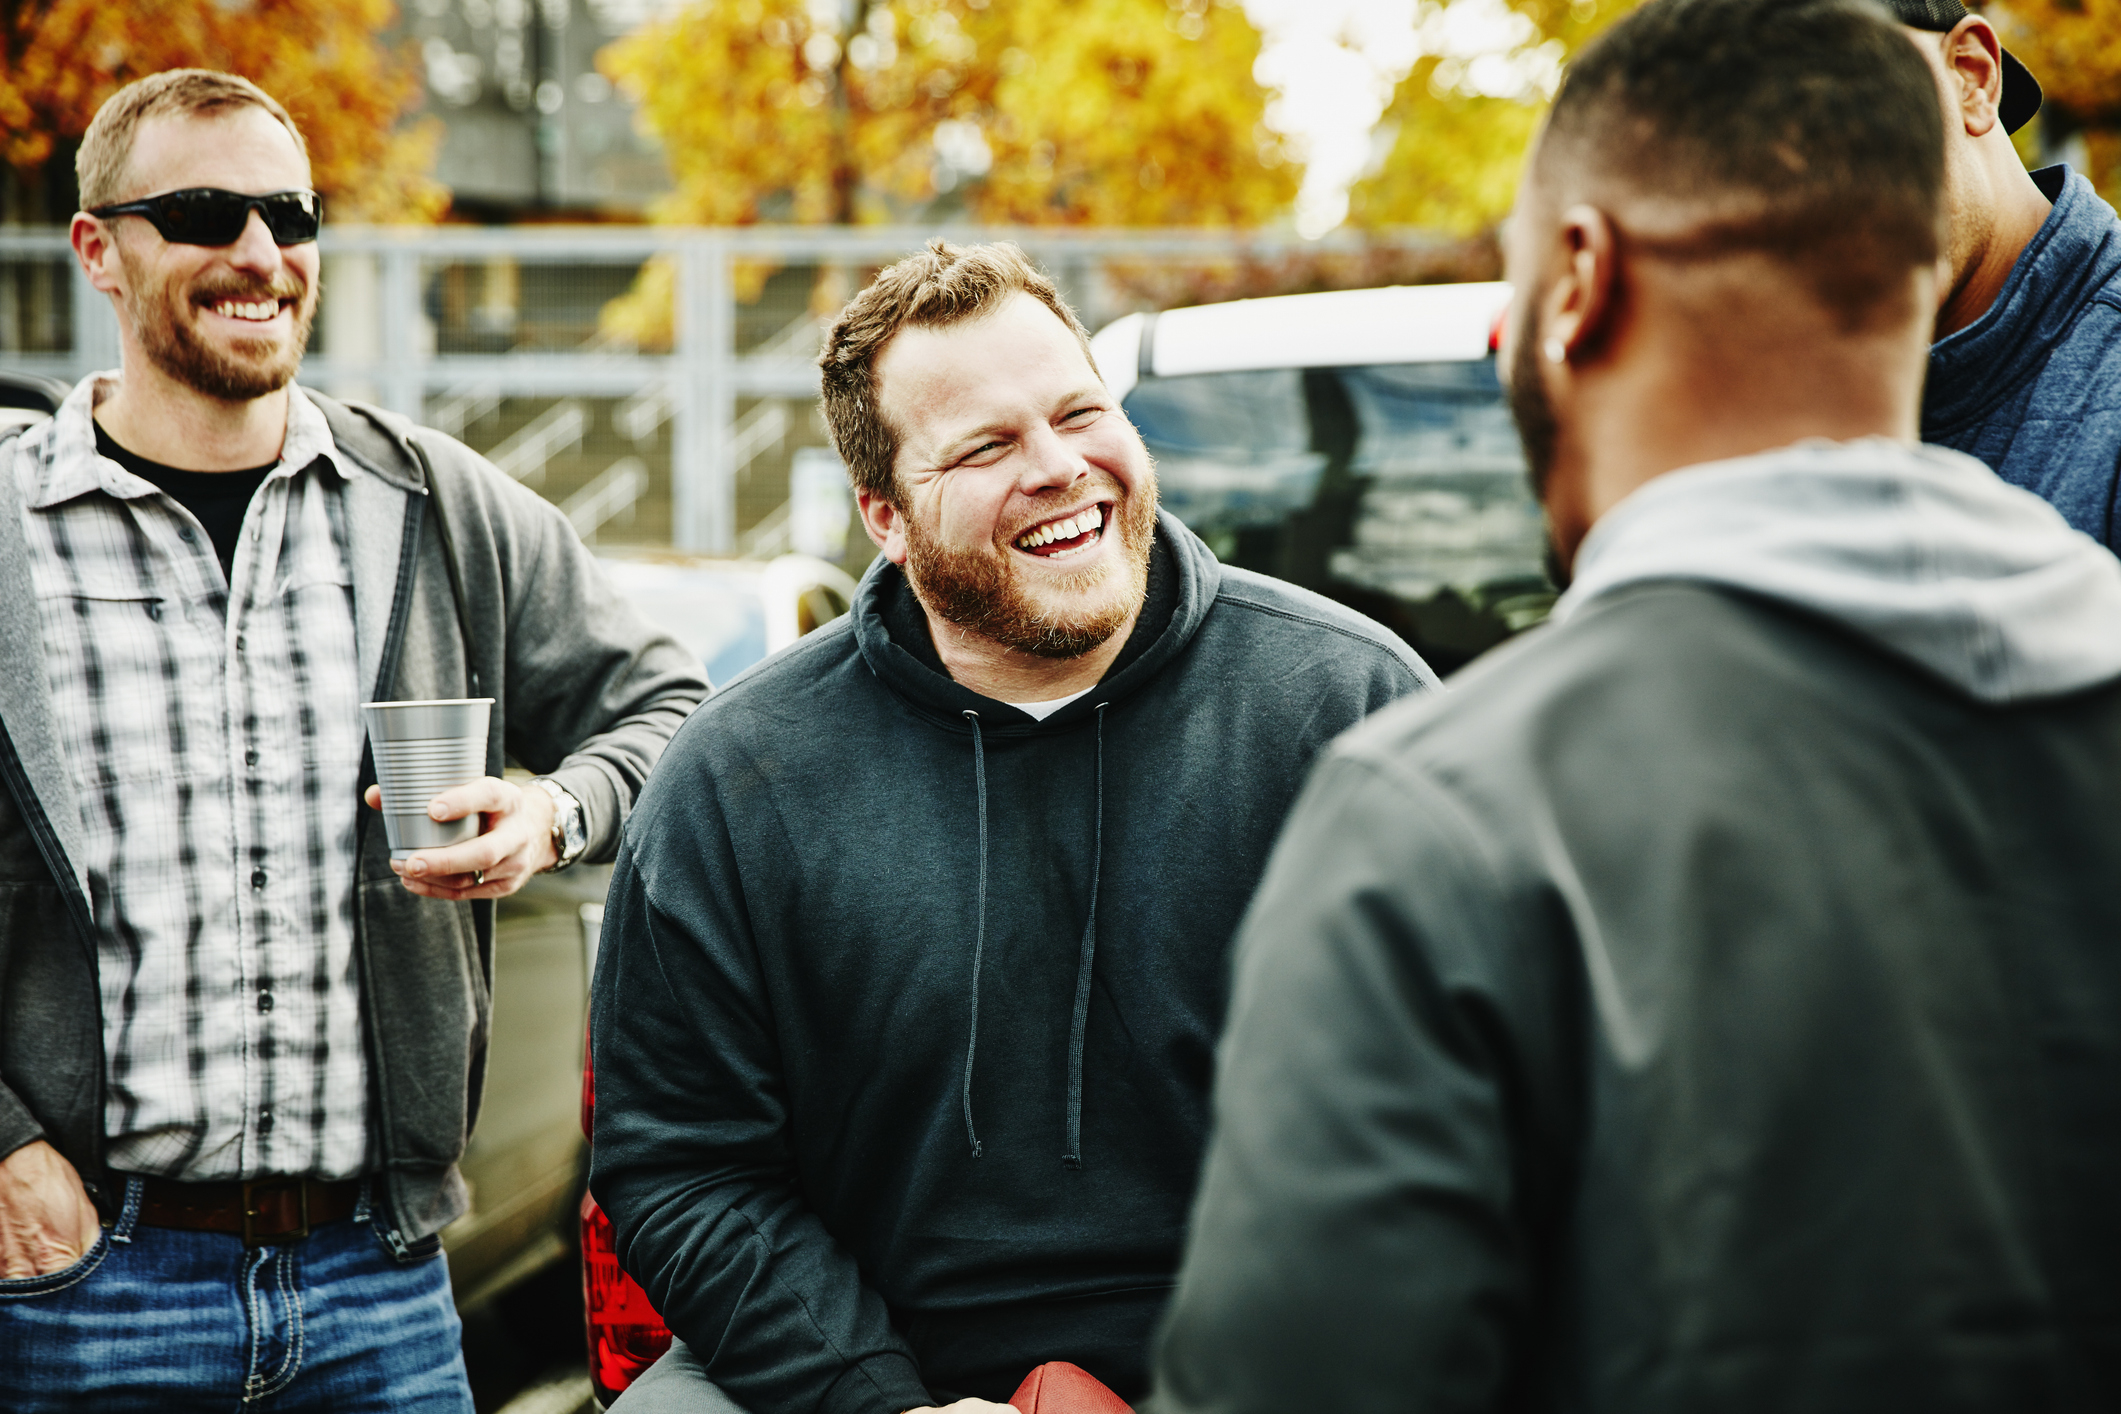 Group of friends laughing and socializing outdoors at a casual gathering